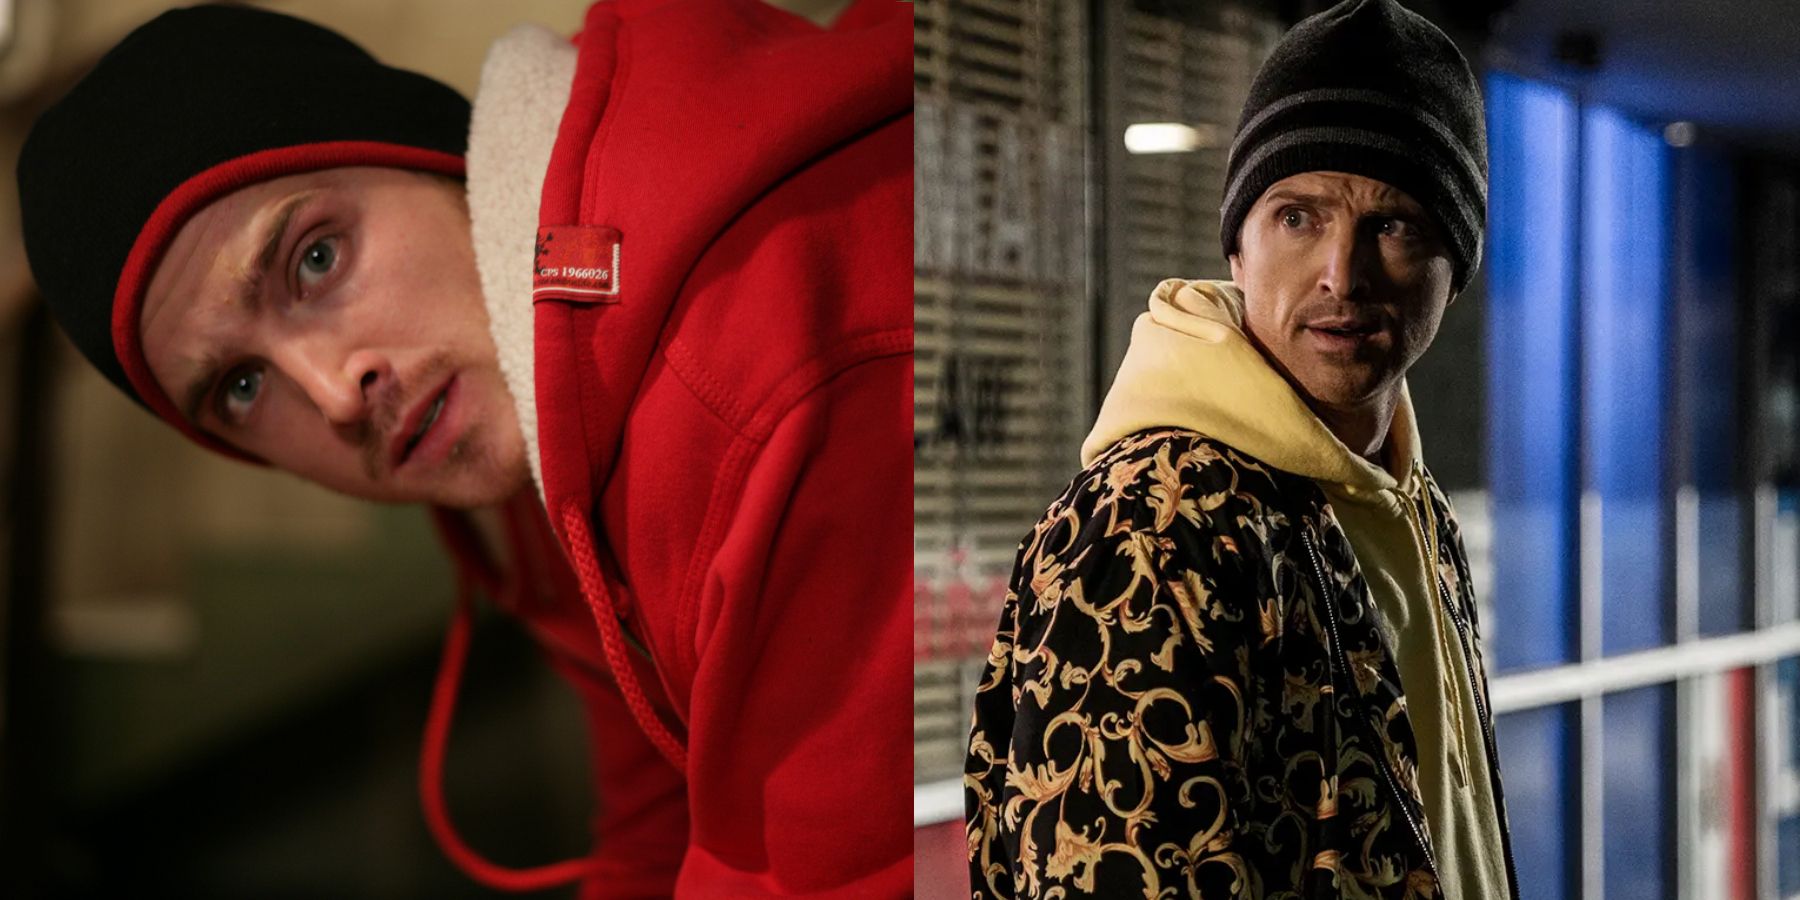 Aaron Paul as Jesse Pinkman in Breaking Bad and Better Call Saul